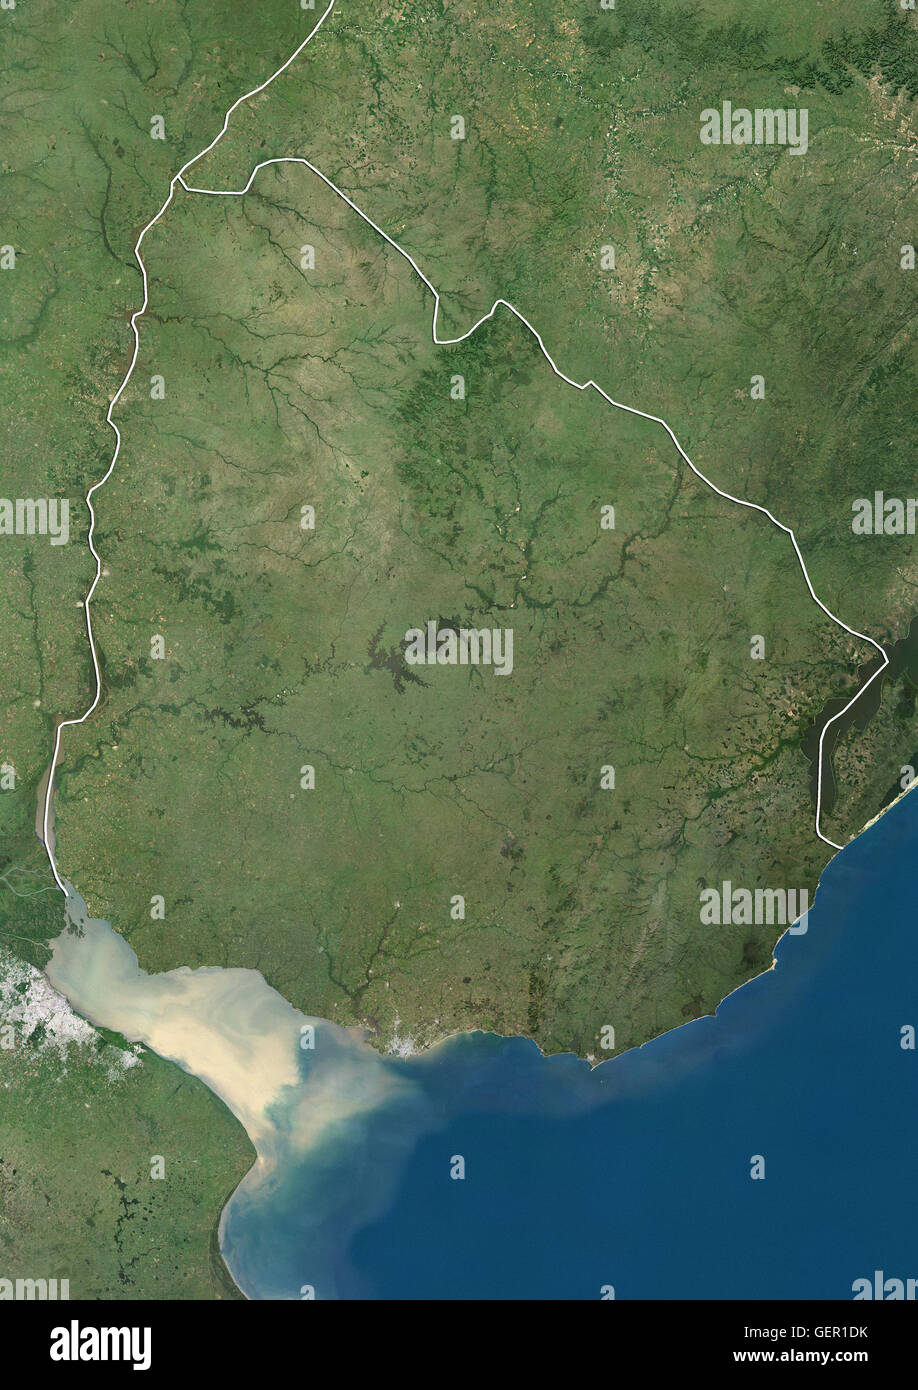 Satellite view of Uruguay (with country boundaries). This image was compiled from data acquired by Landsat satellites. Stock Photo